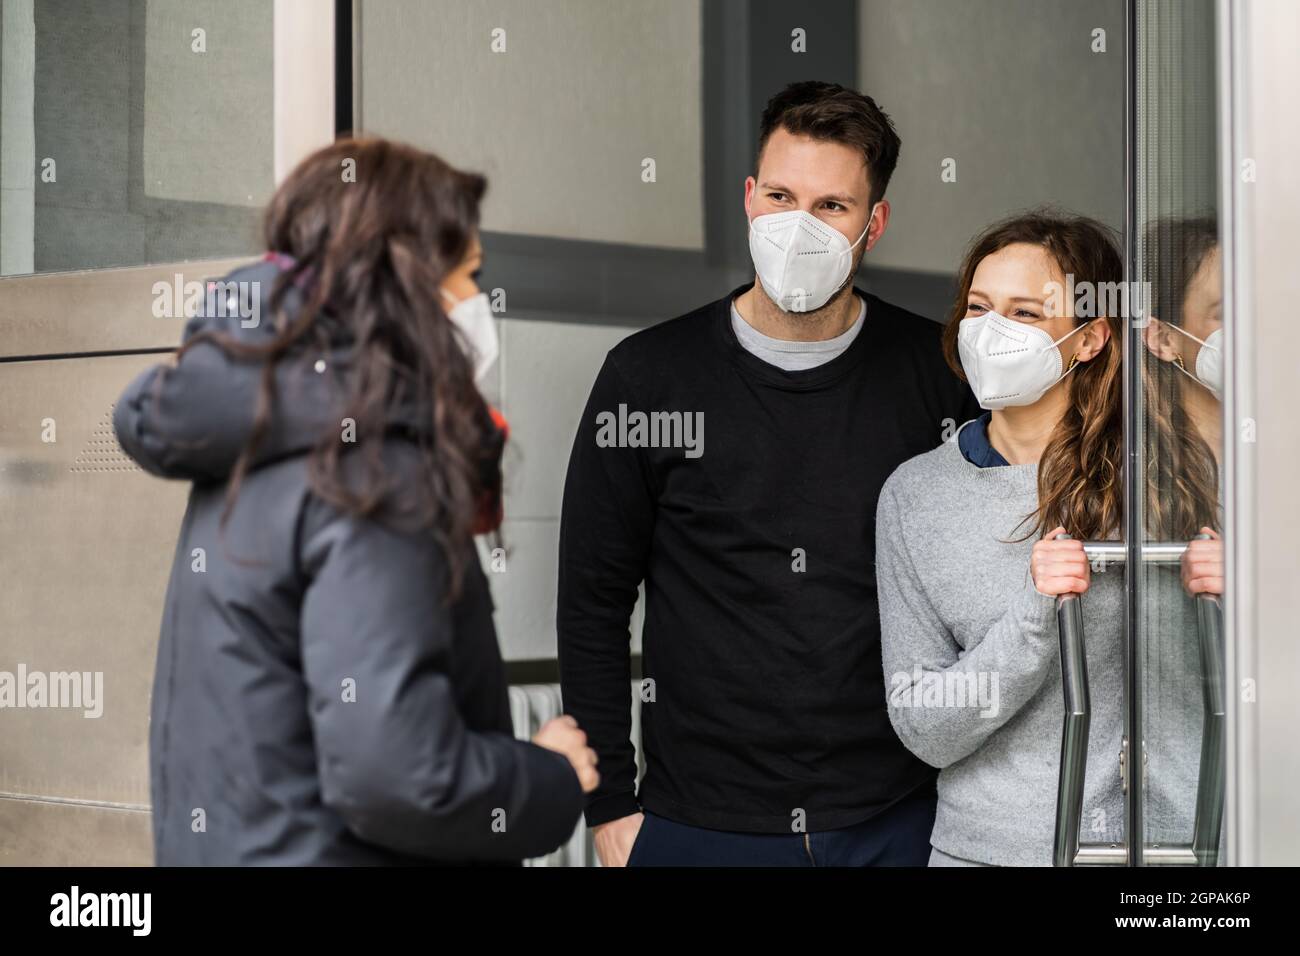 Neighbor Helping Hand And Assistance In Face Mask Stock Photo